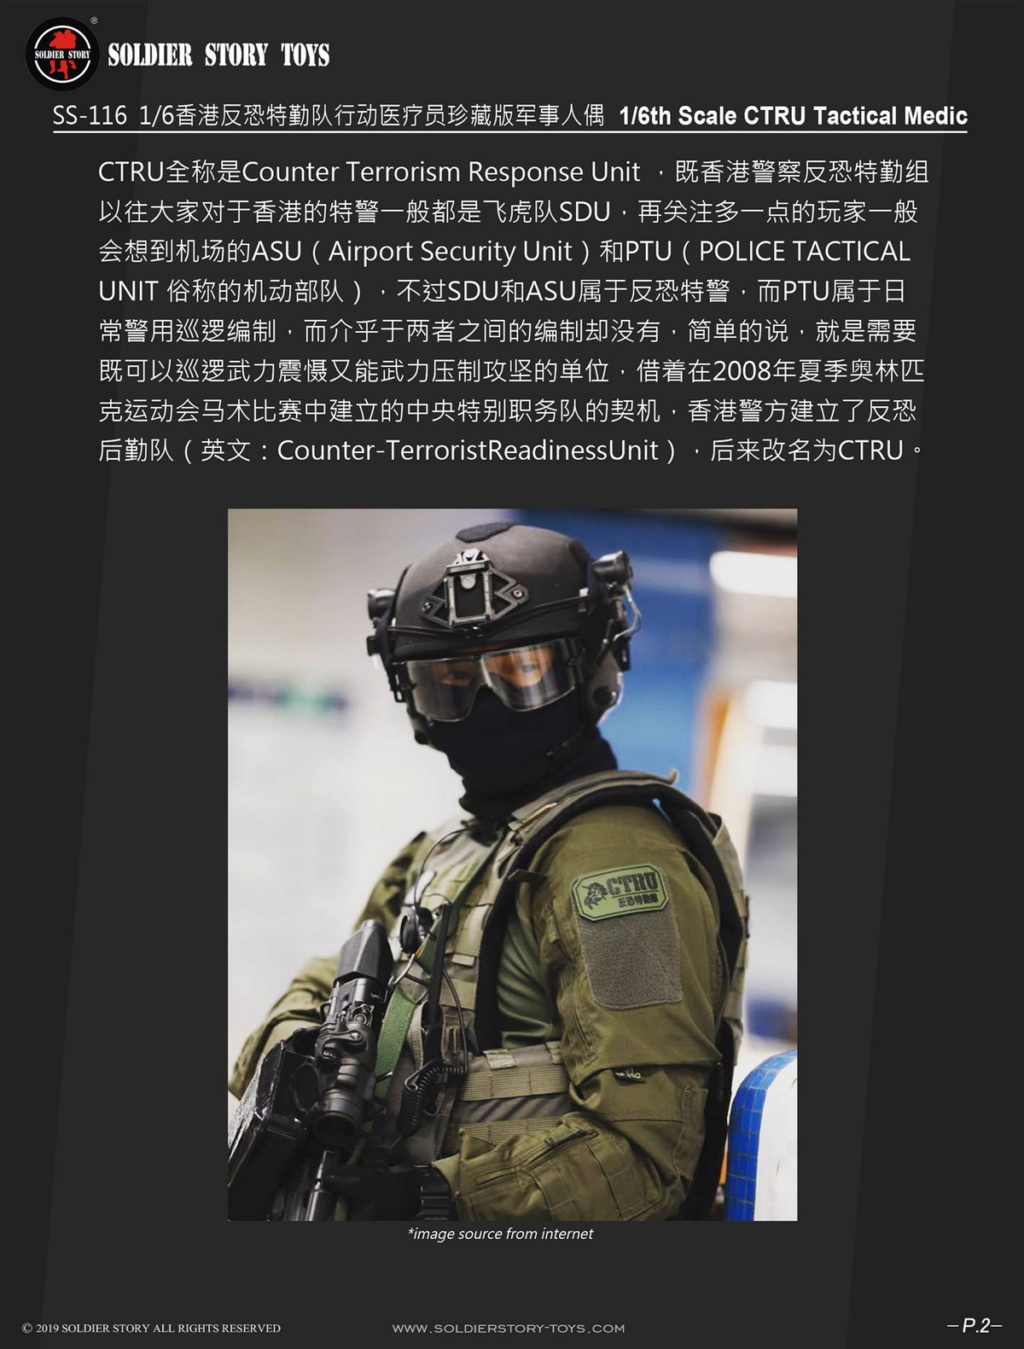 soldierstory - NEW PRODUCT: SoldierStory: 1/6 Hong Kong anti-terrorism secret service team CTRU - Mobile medical staff "Xiao Zhang" (SS116) updated full map 23394810